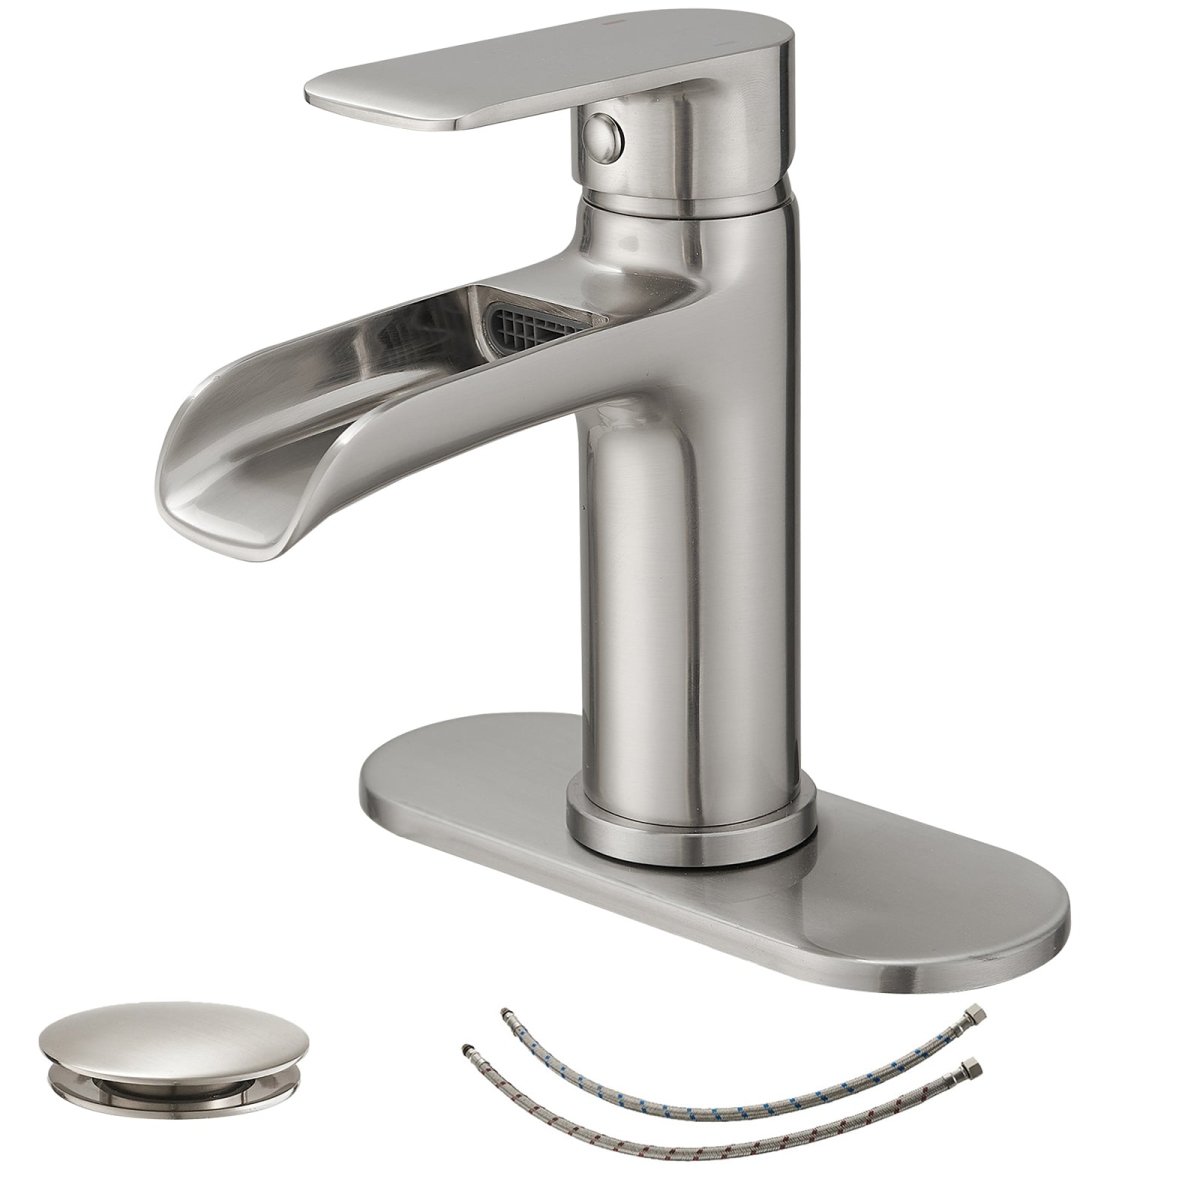 Waterfall Bathroom Faucet One Hole Faucet Brushed Nickel - buyfaucet.com